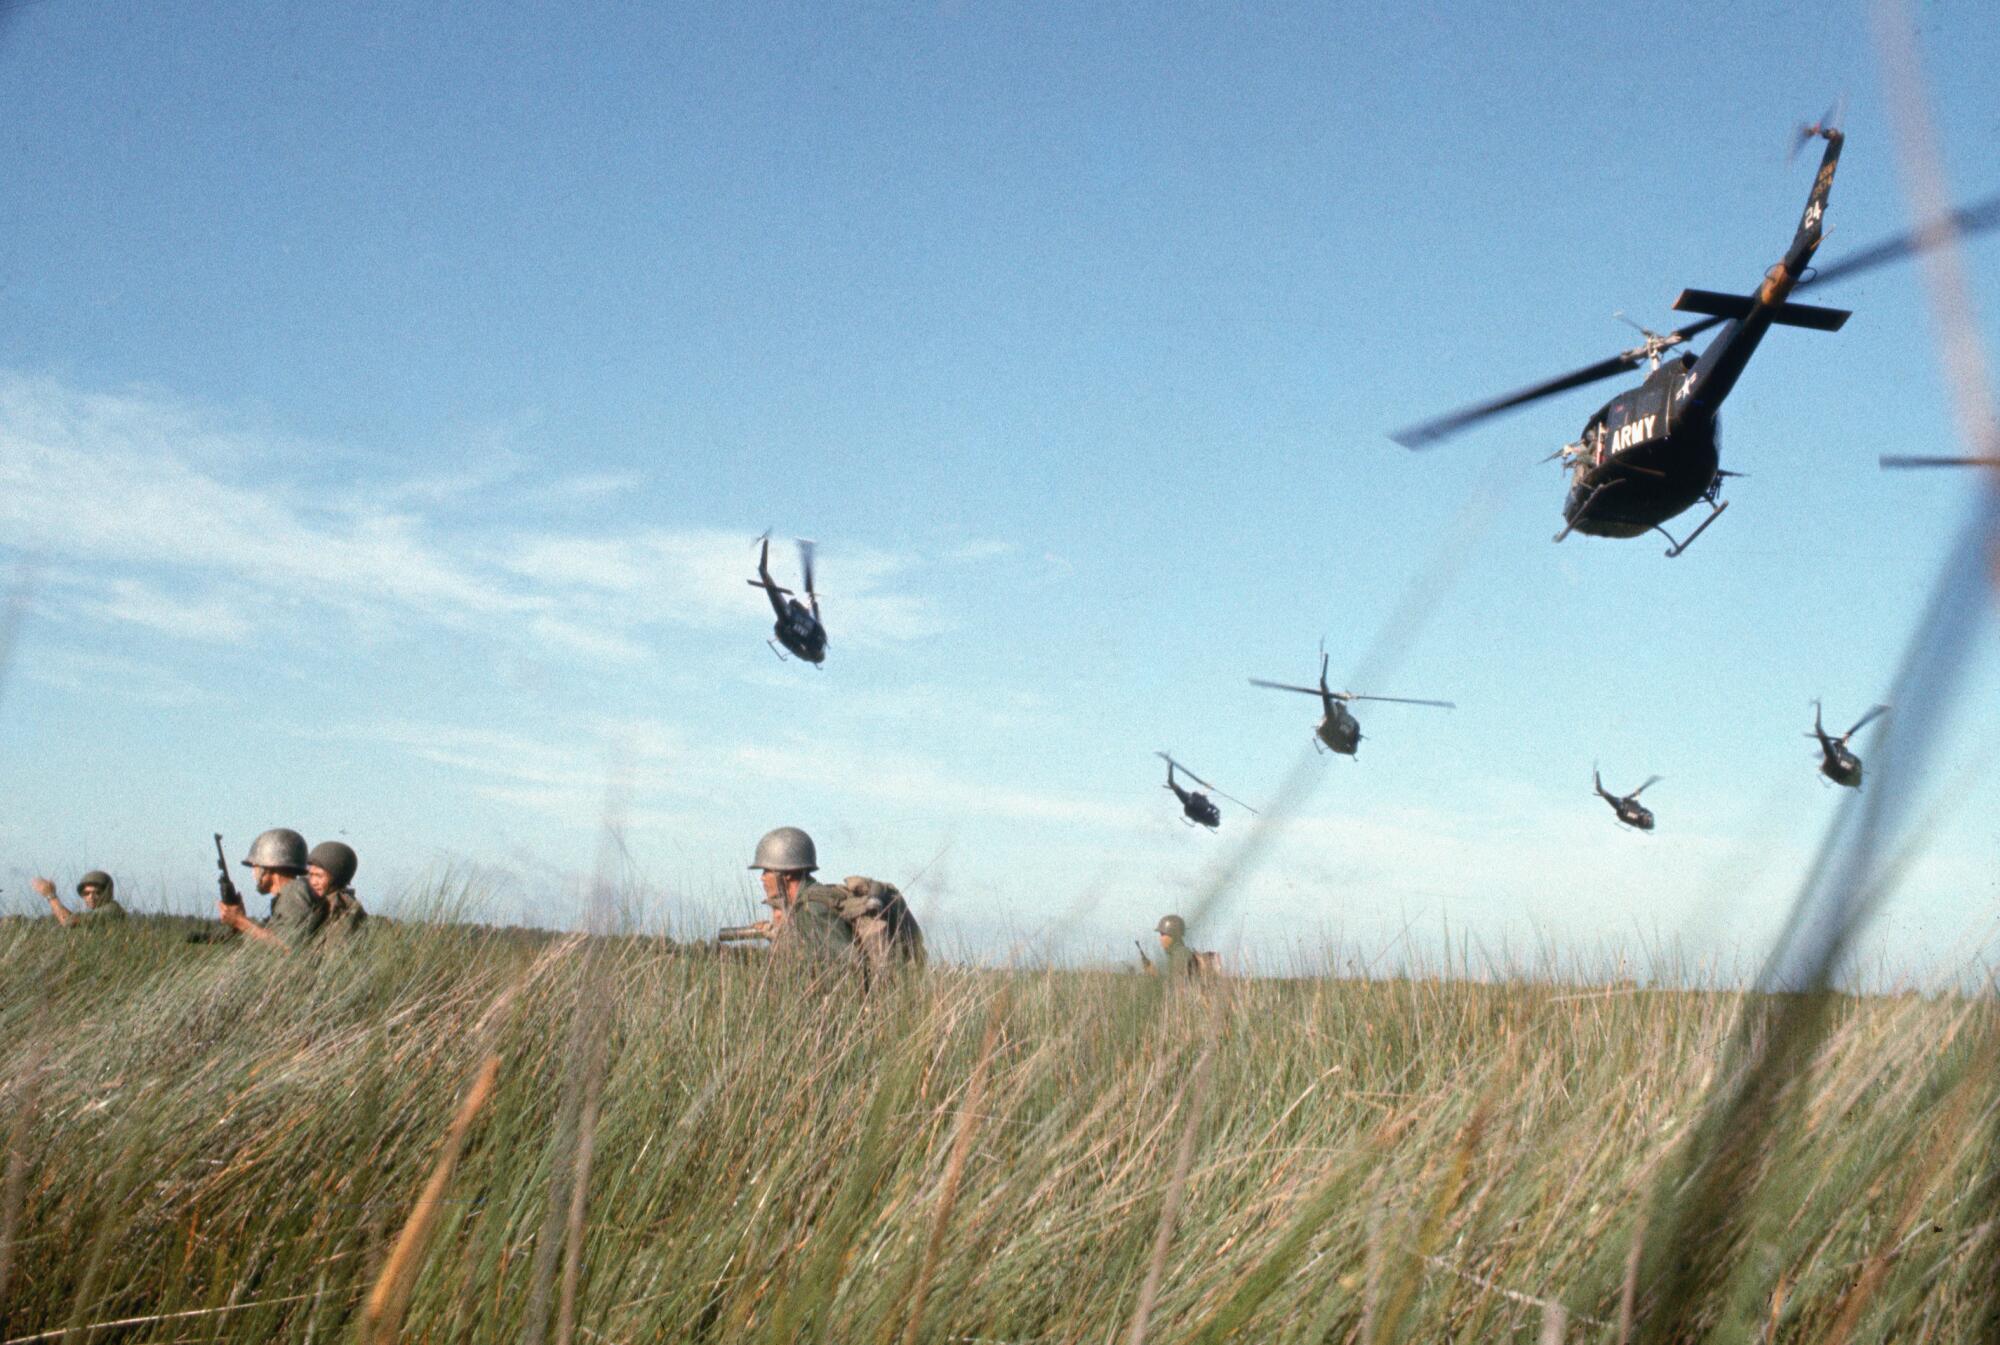 ARVN (South Vietnamese Army) rangers, supported by helicopters, make their way 